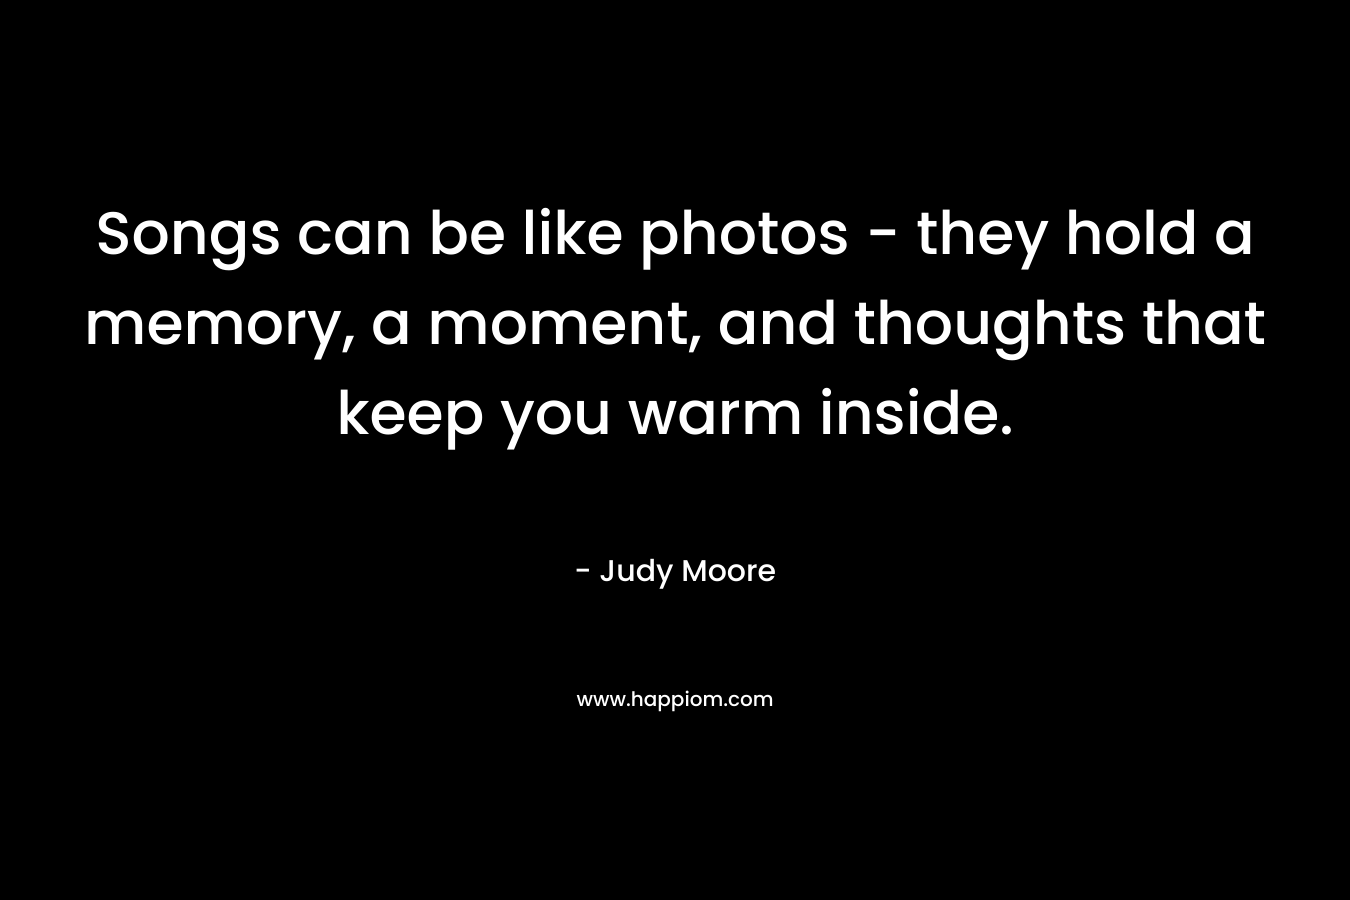 Songs can be like photos – they hold a memory, a moment, and thoughts that keep you warm inside. – Judy Moore